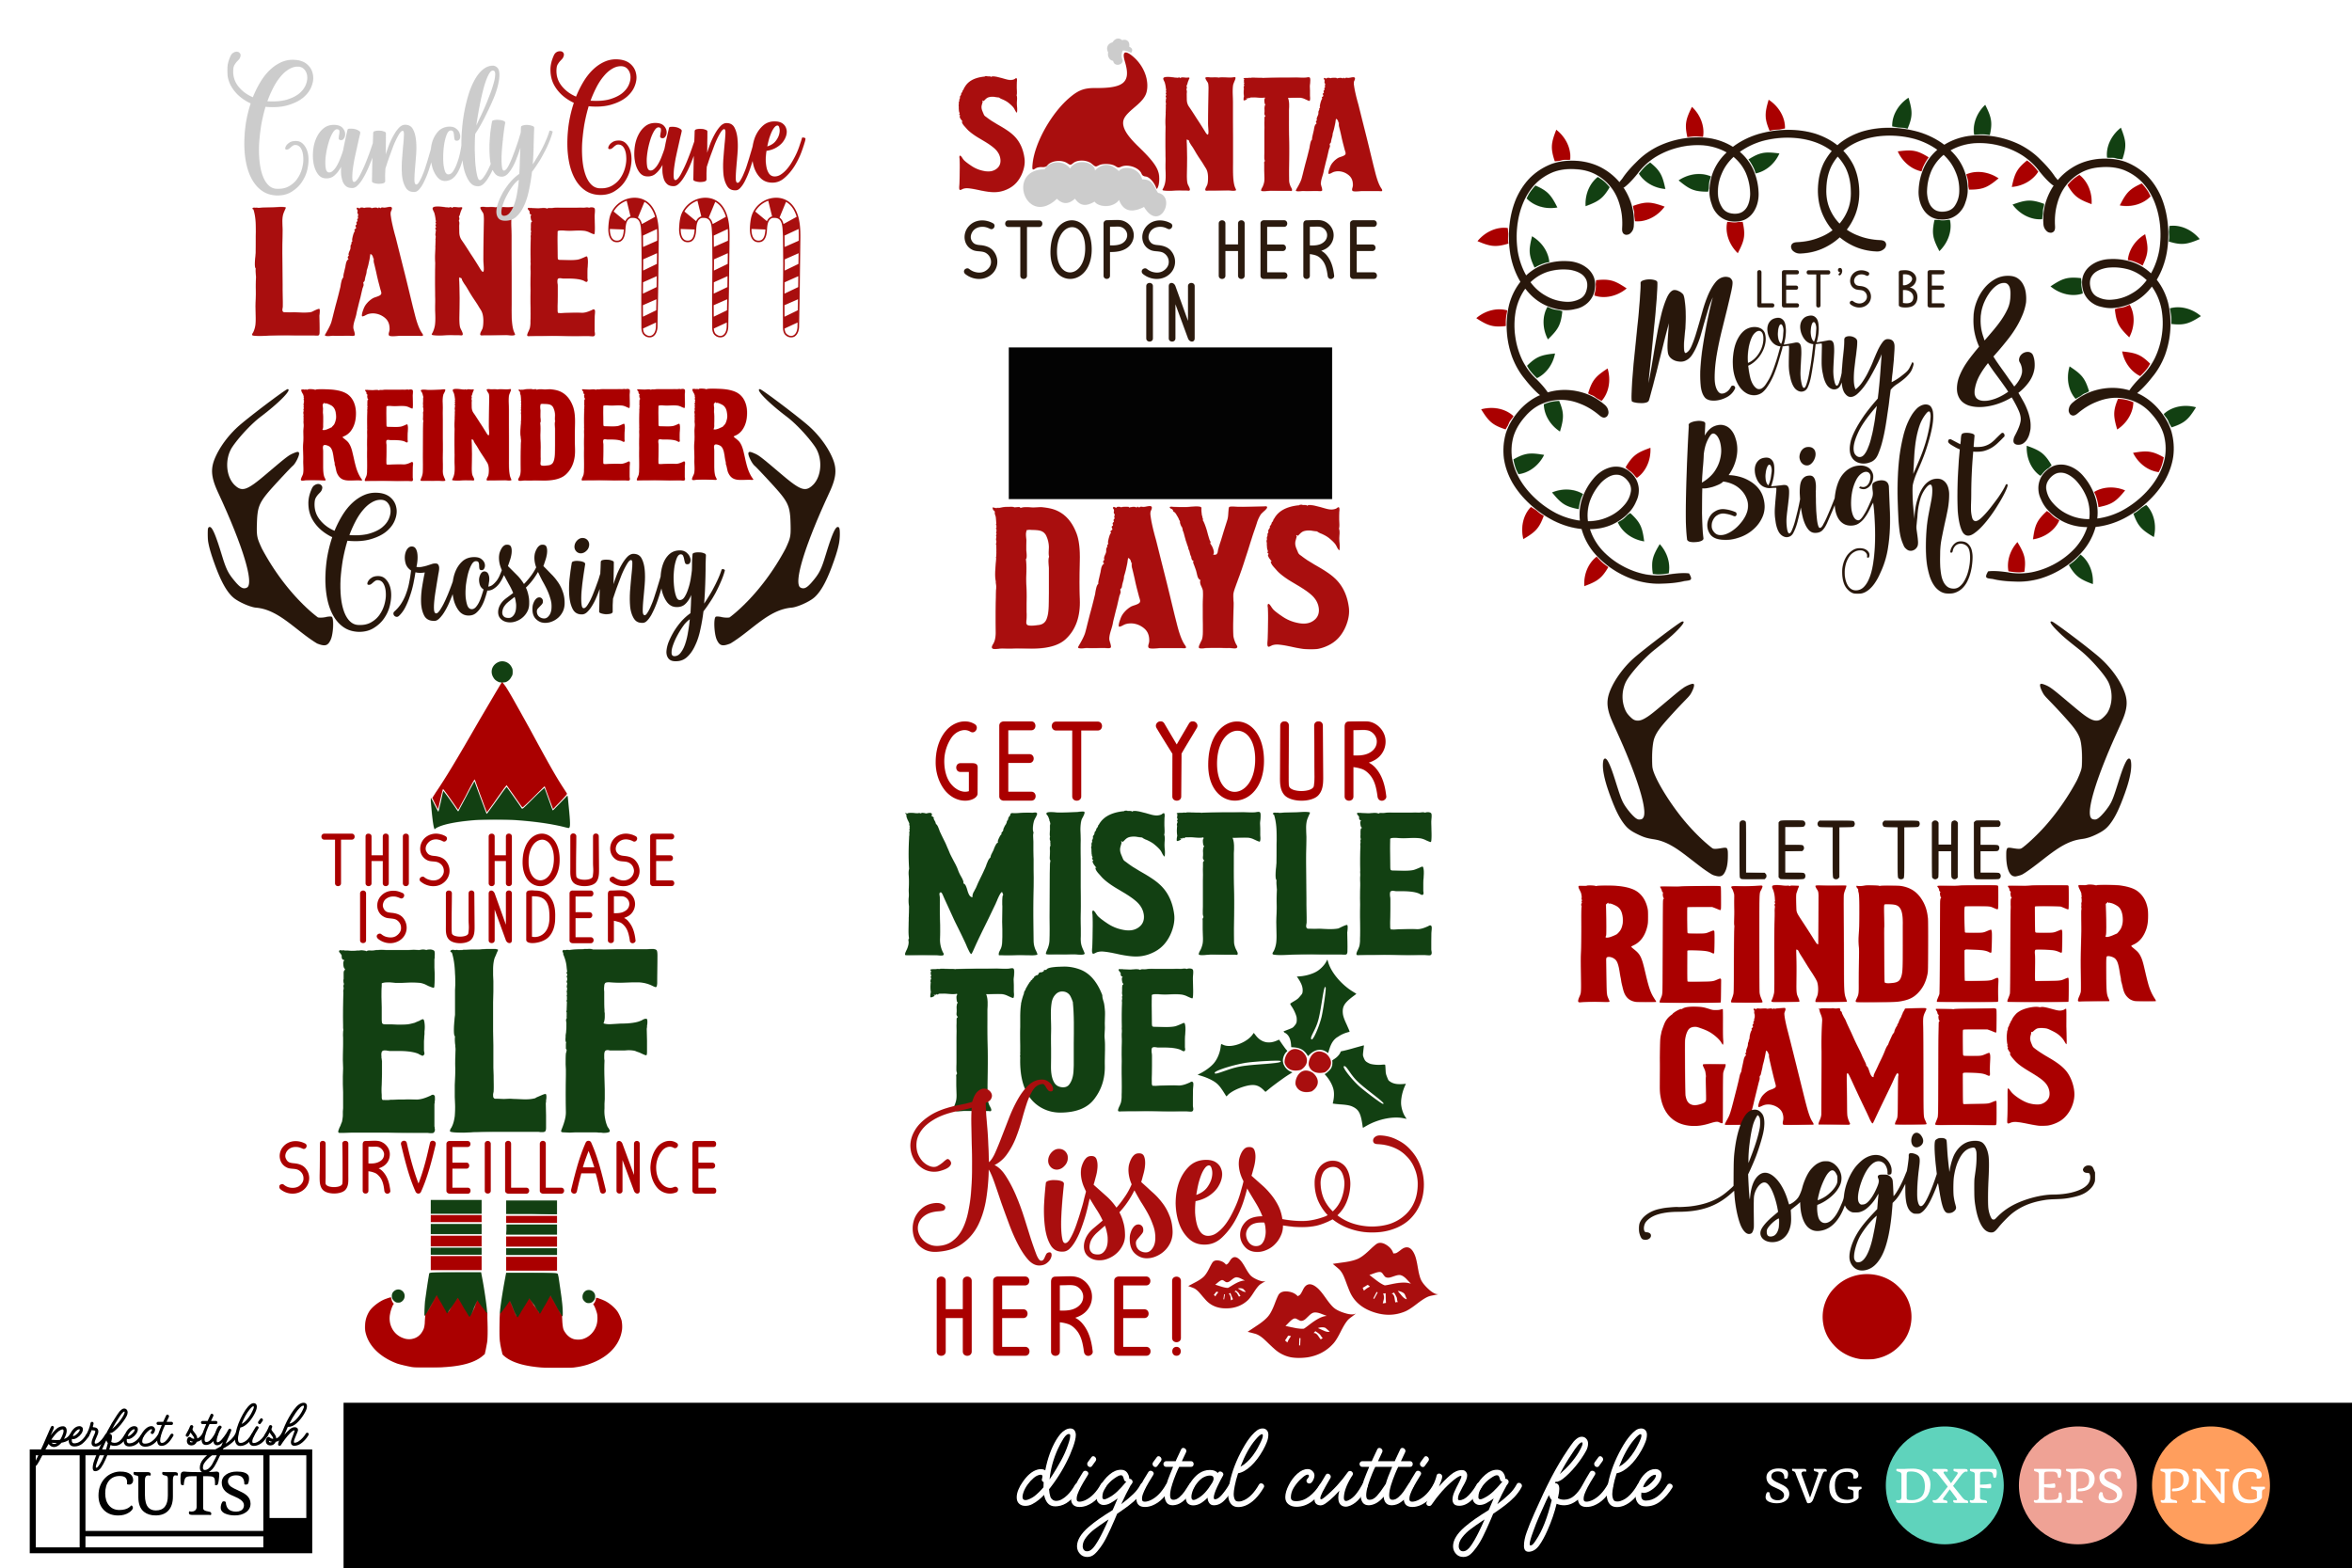 Download Christmas Wood Sign Designs Collection - Christmas SVG Files